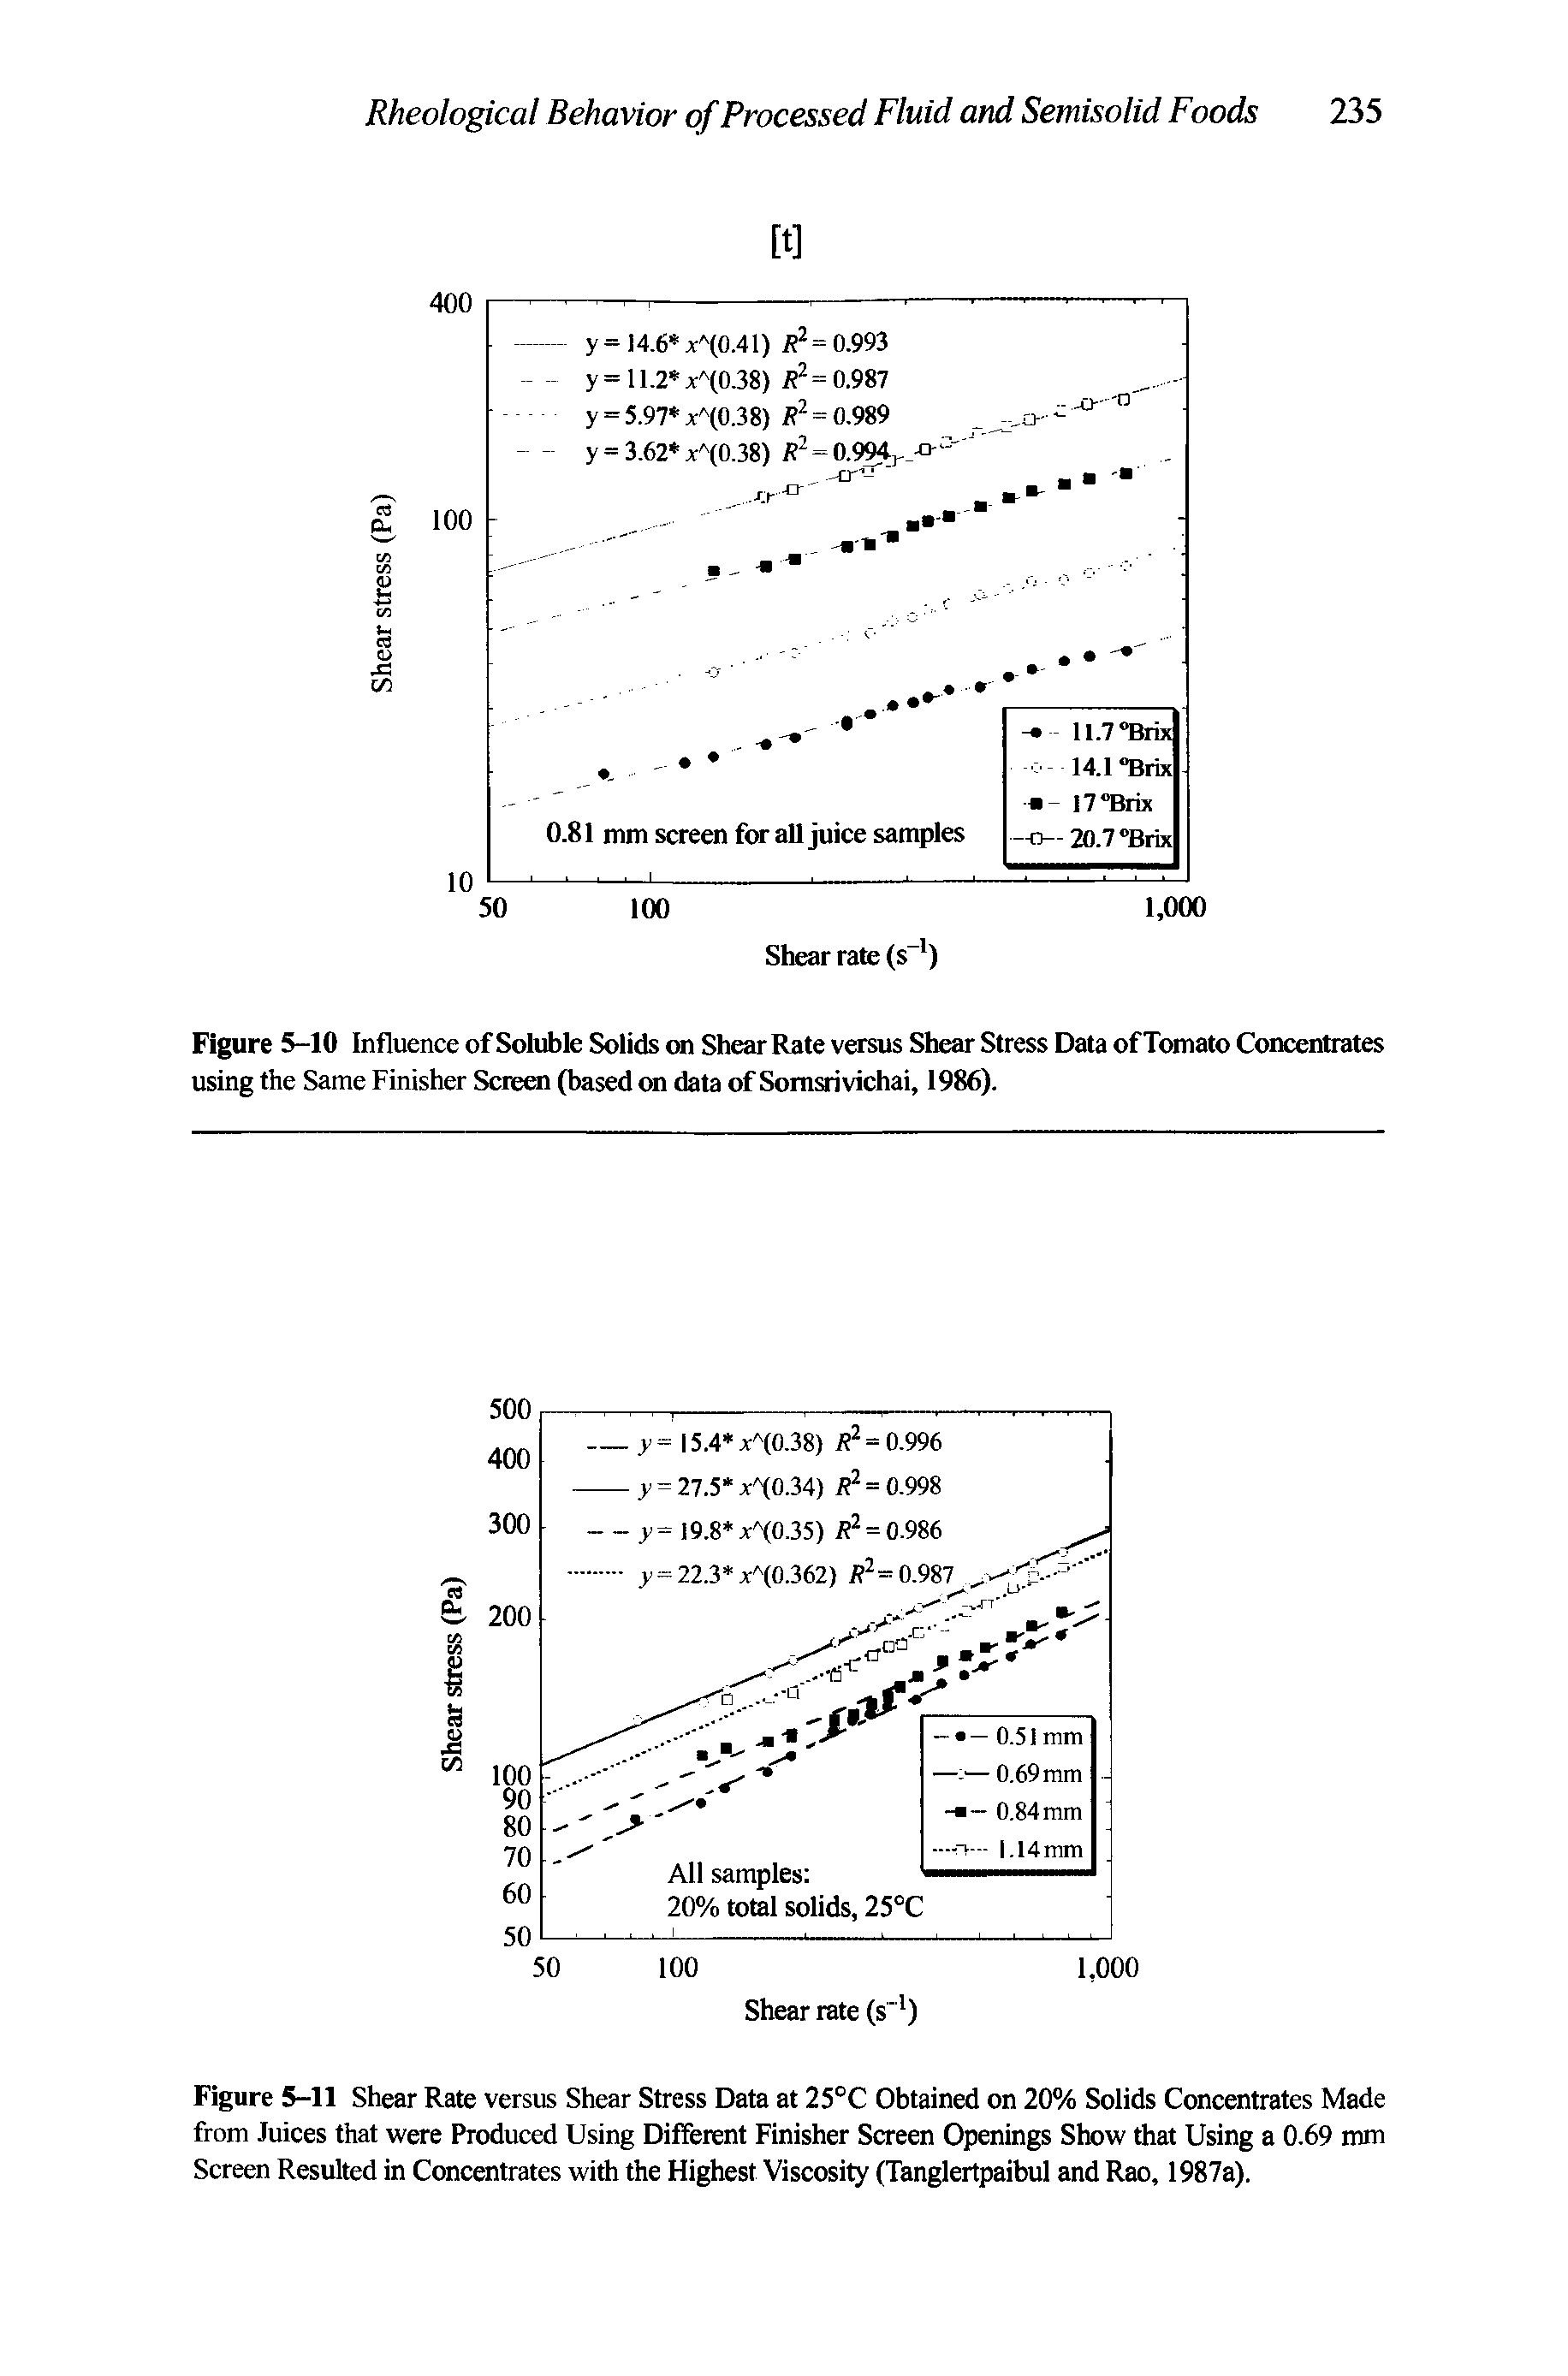 Figure 5-11 Shear Rate versus Shear Stress Data at 25°C Obtained on 20% Solids Concentrates Made from Juices that were Produced Using Different Finisher Screen Openings Show that Using a 0.69 mm Screen Resulted in Concentrates with the Highest Viscosity (Tanglertpaibul and Rao, 1987a).